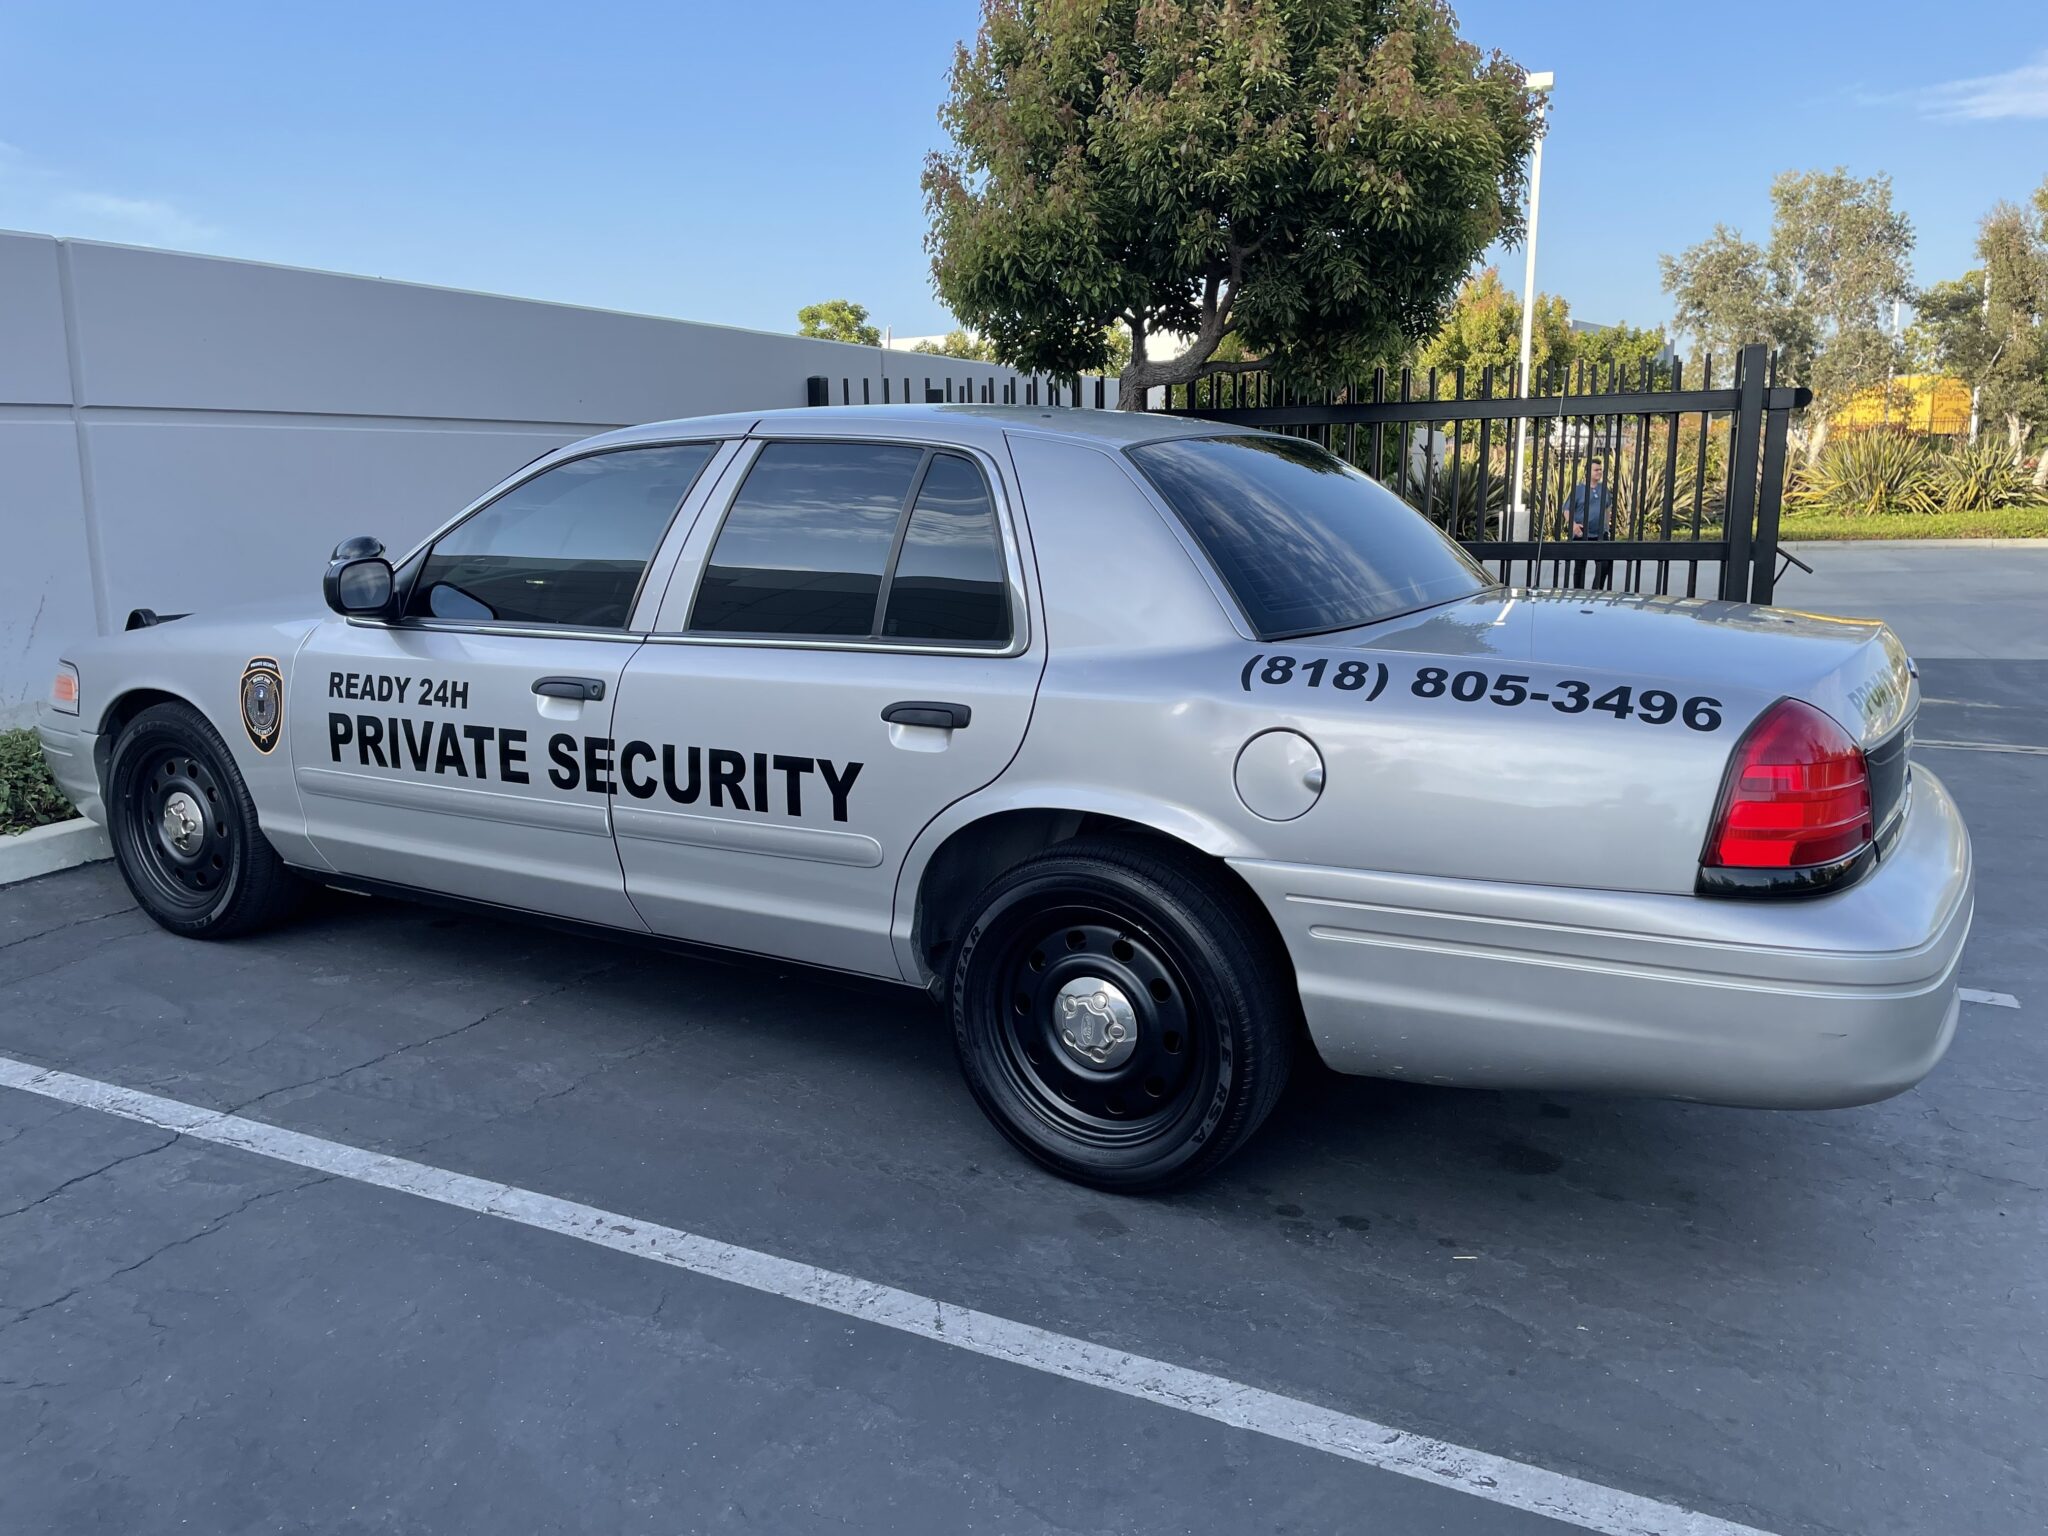 THE BEST SECURITY SERVICES providers In LOS ANGELES, CA